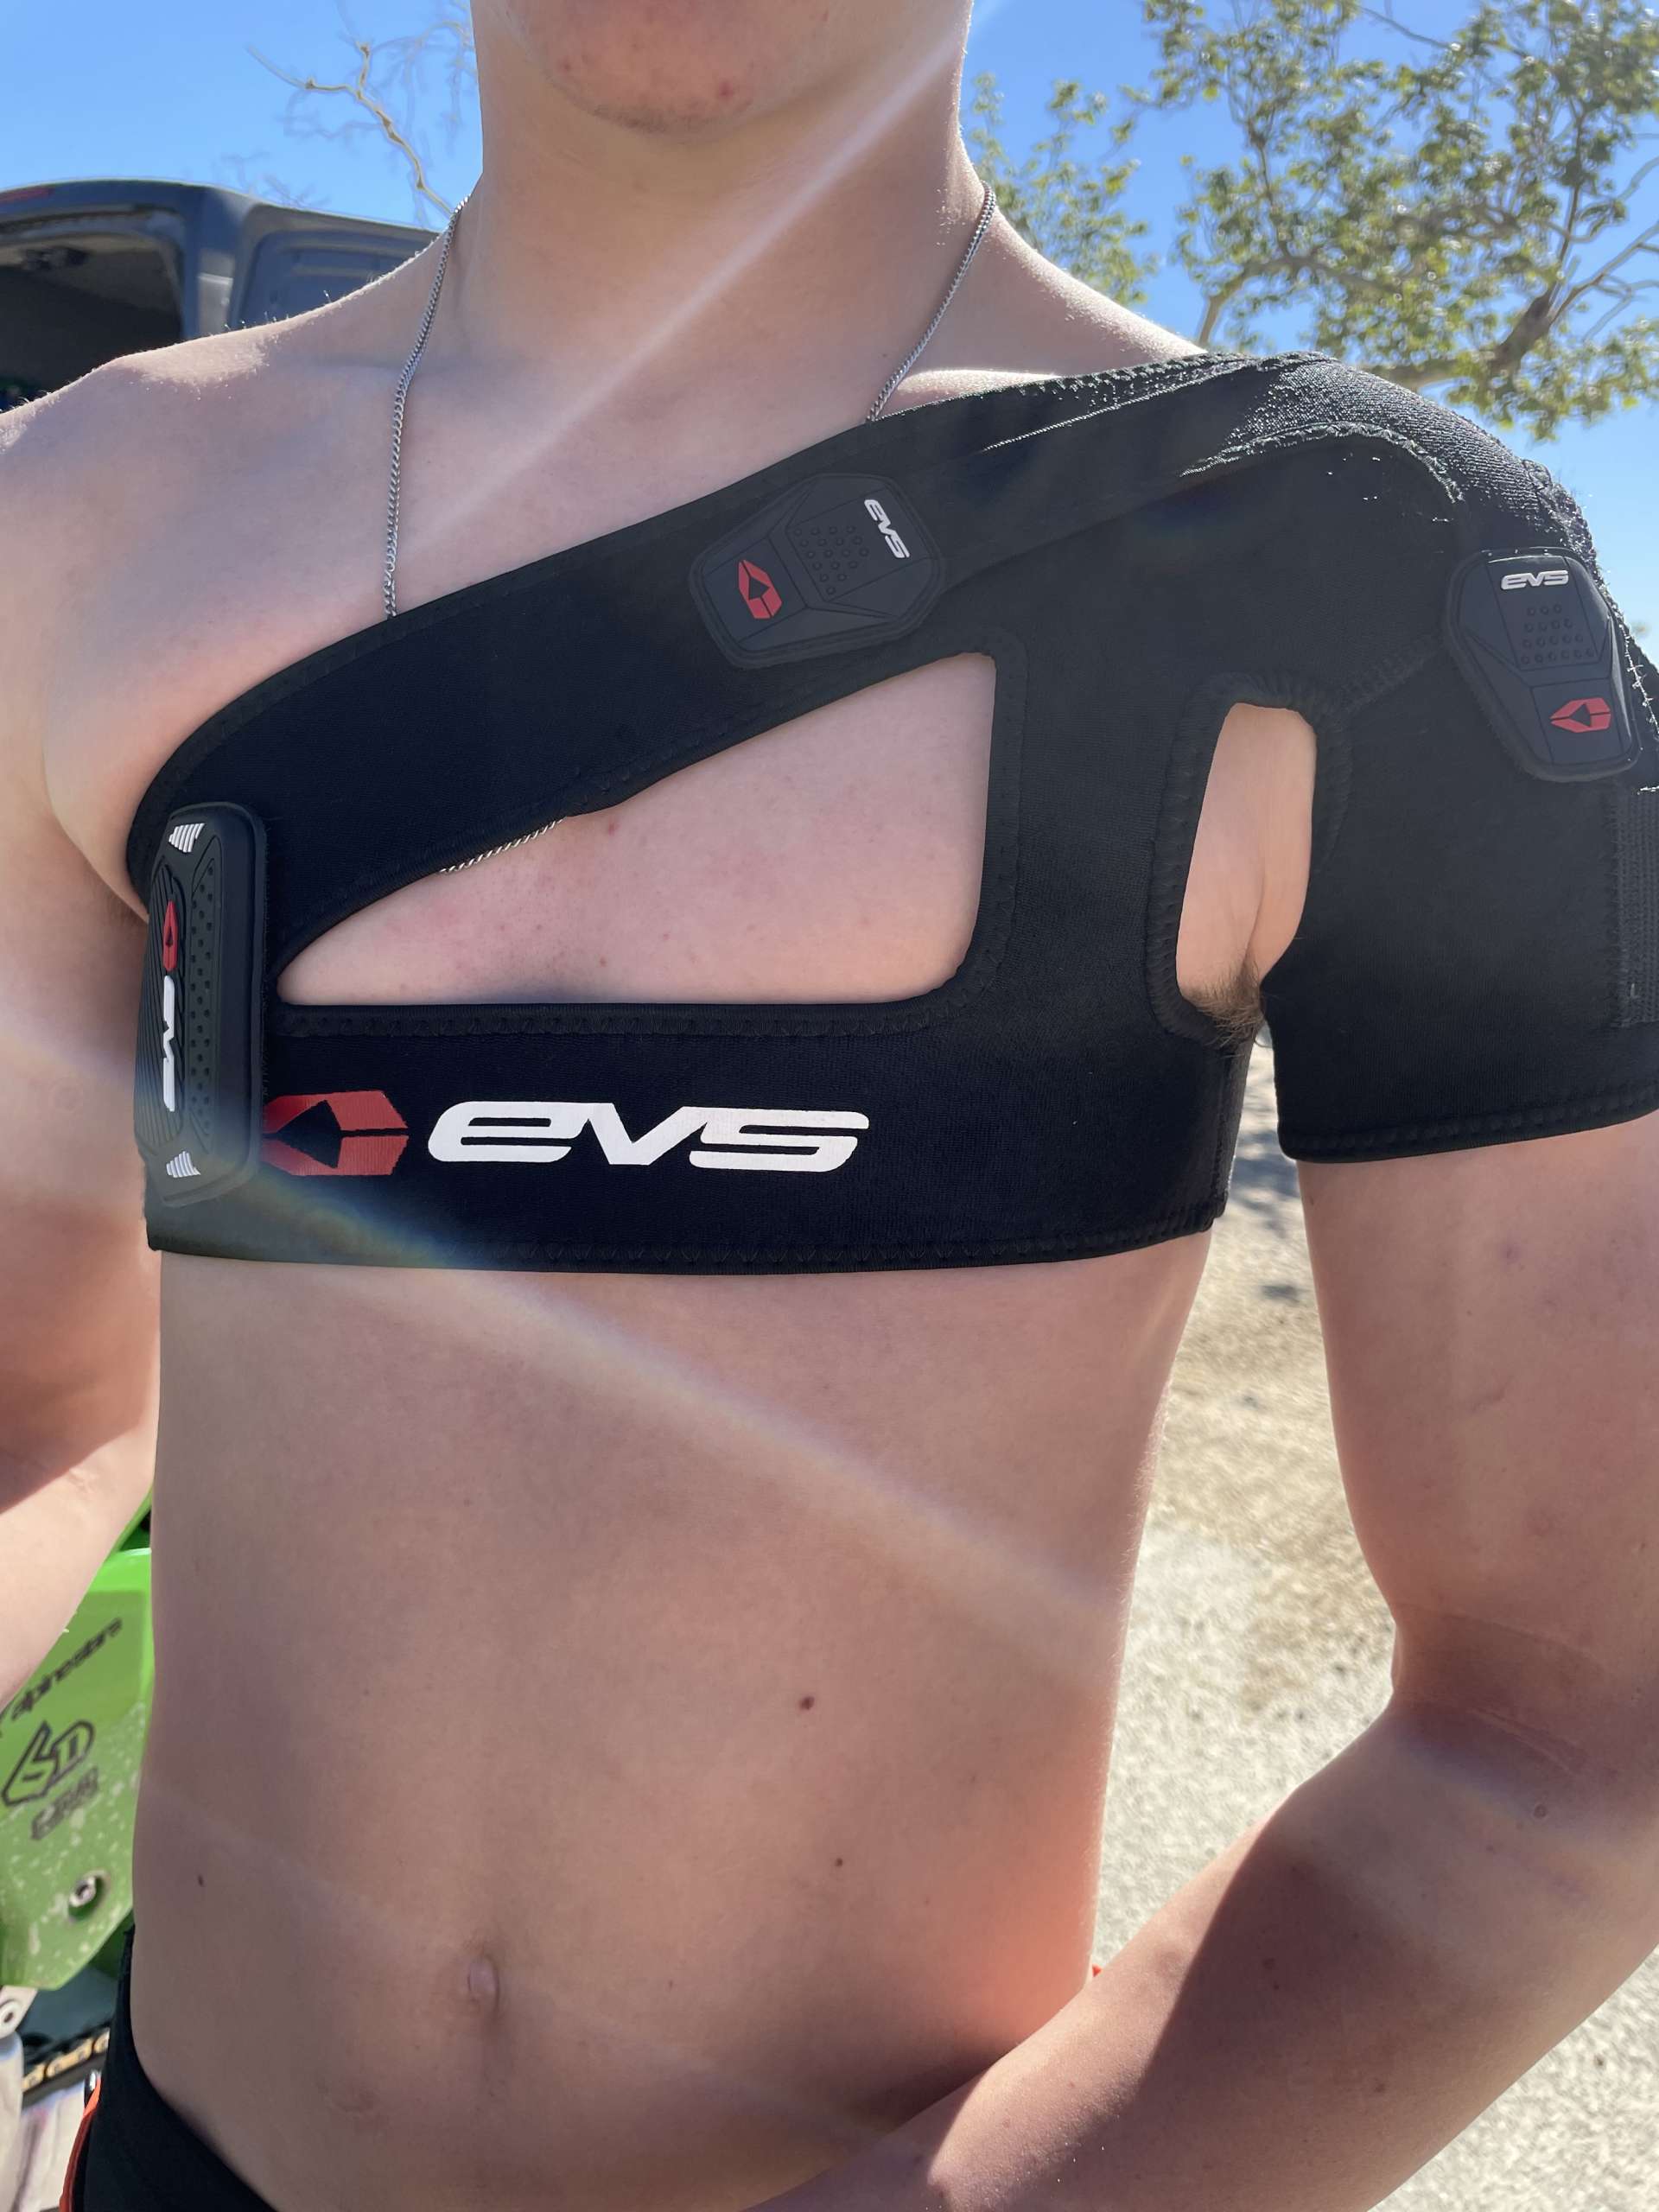 EVS Sports - We Are Protection